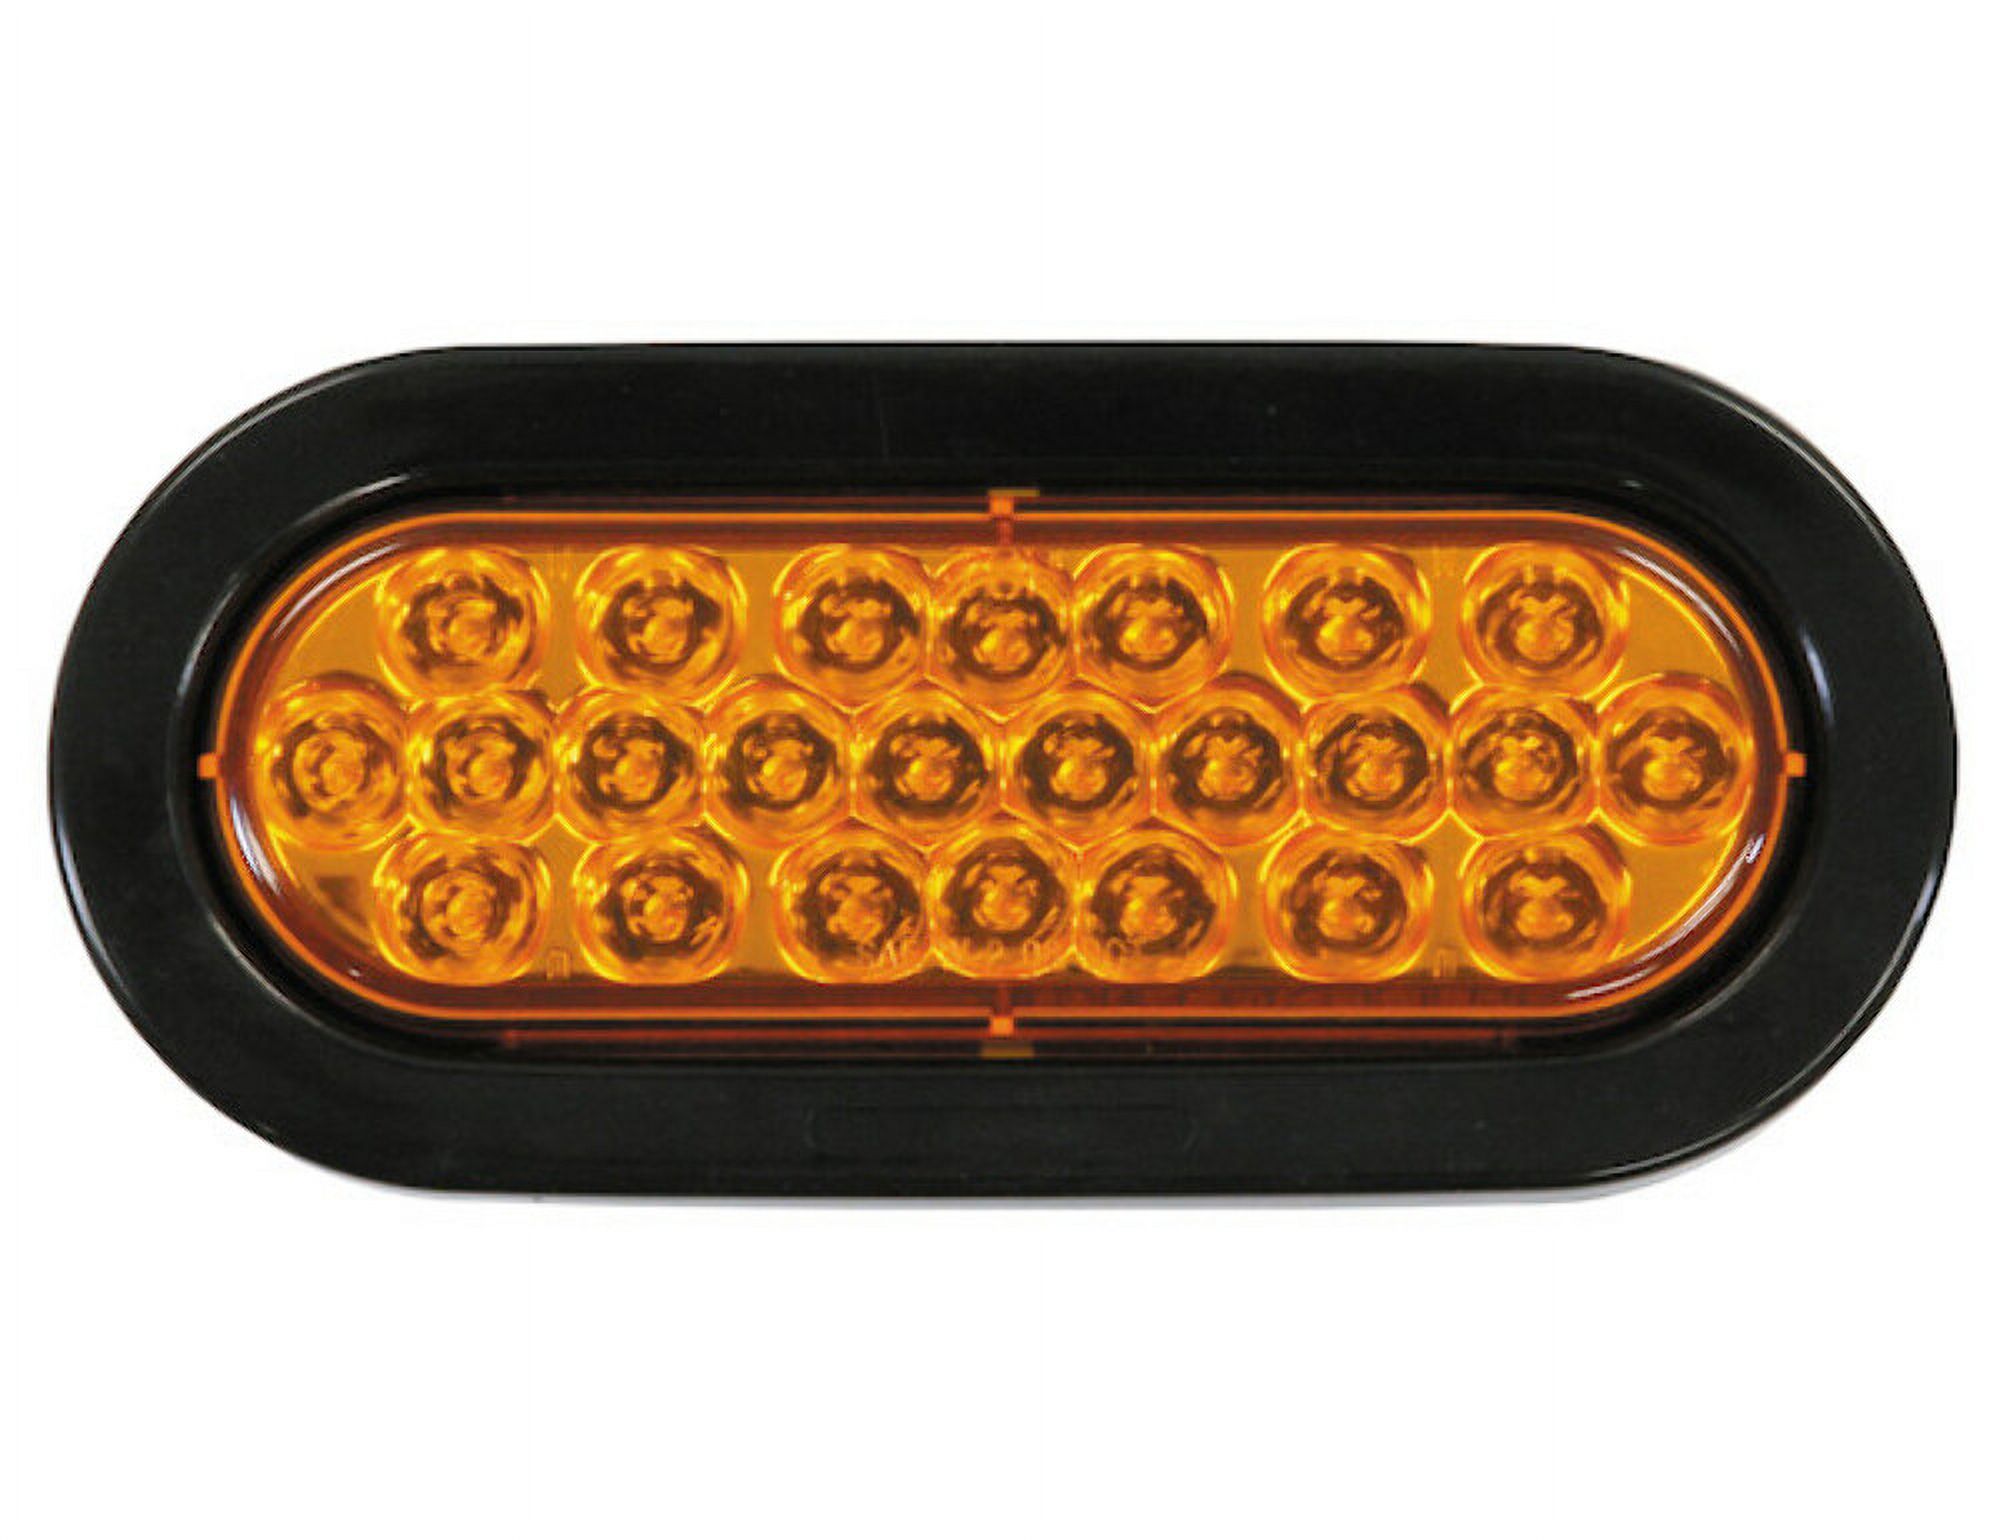 Barjan 04820402 6.5 in. SS Mount with Oval Amber Light & Wiring Harness - image 3 of 3